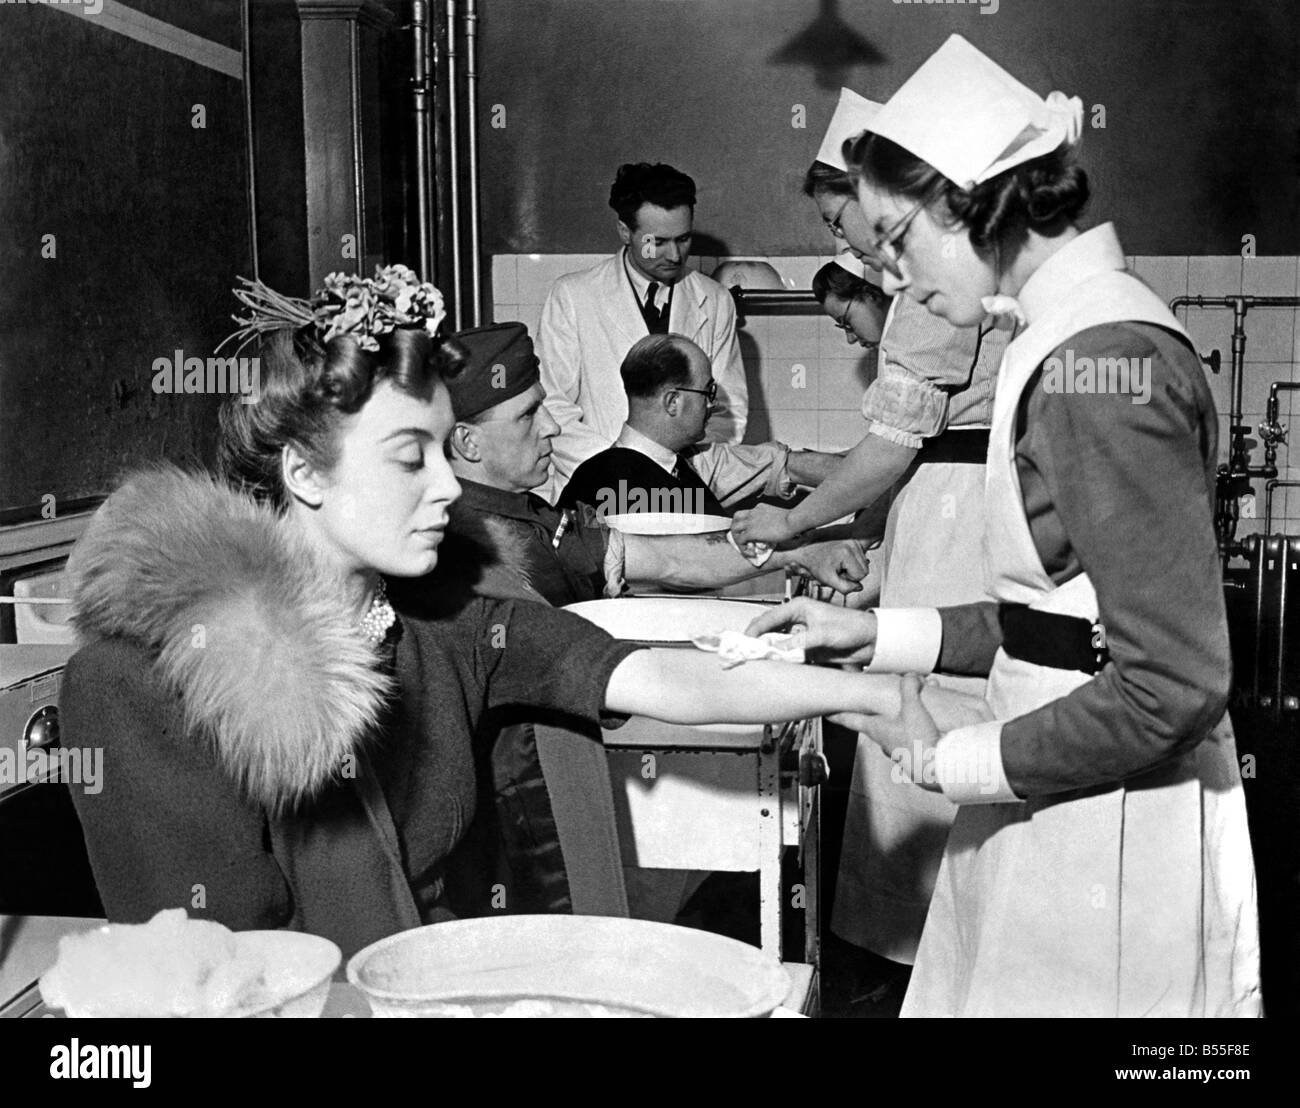 Volunteers for the mustard gas tests at the London Homeopathic Hospital. March 1942 P009213 Stock Photo